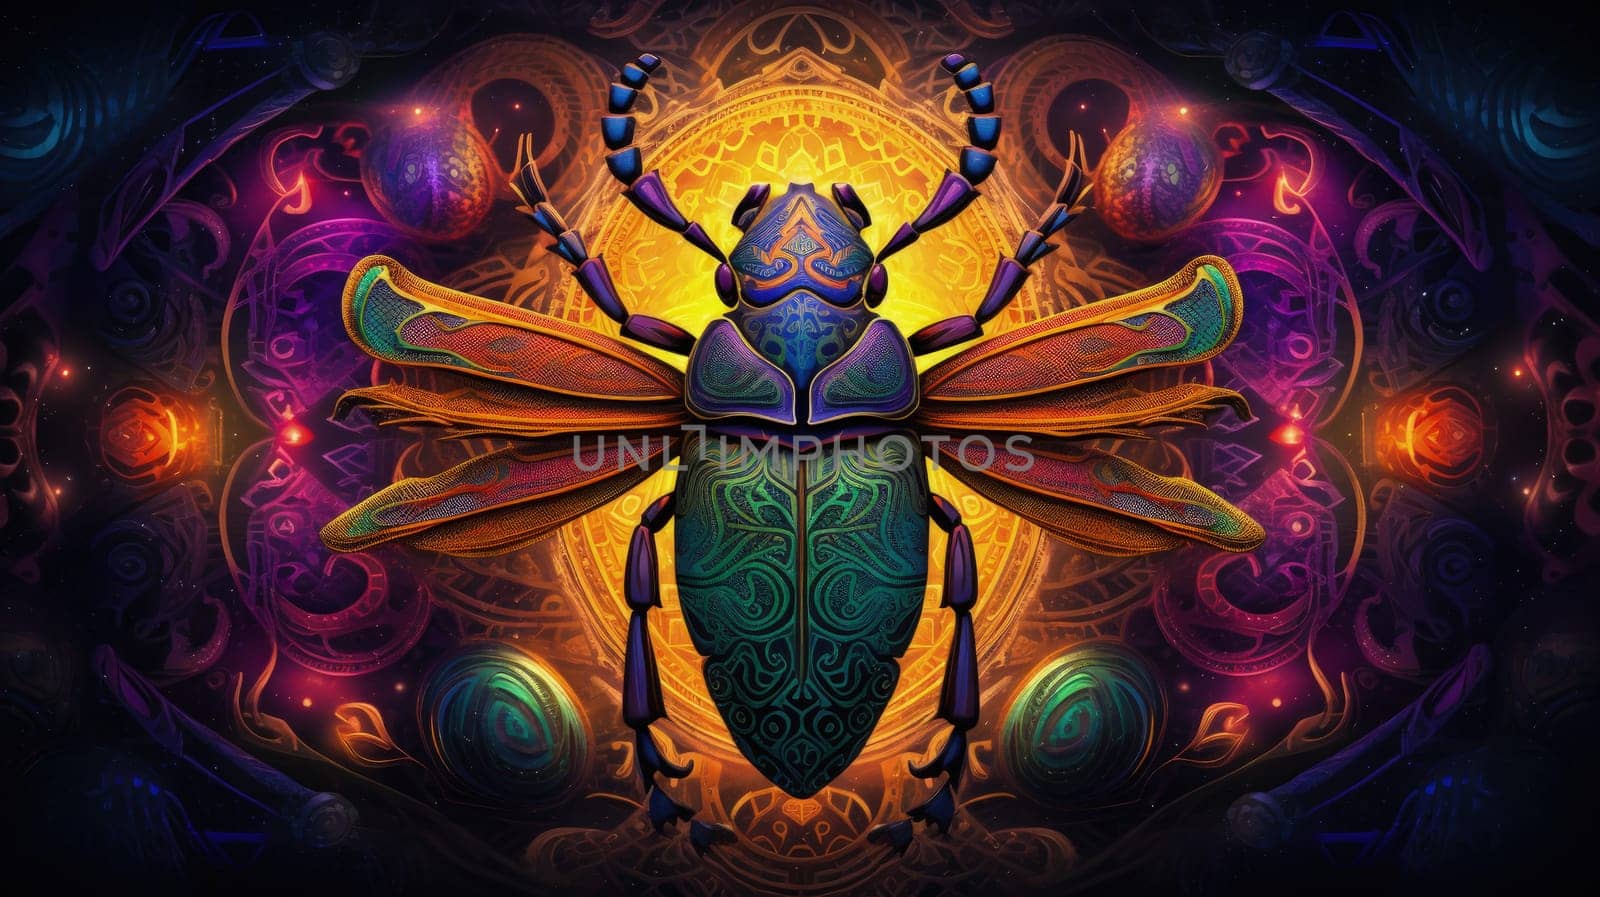 A close-up illustration of a scarab beetle with a colorful abstract background